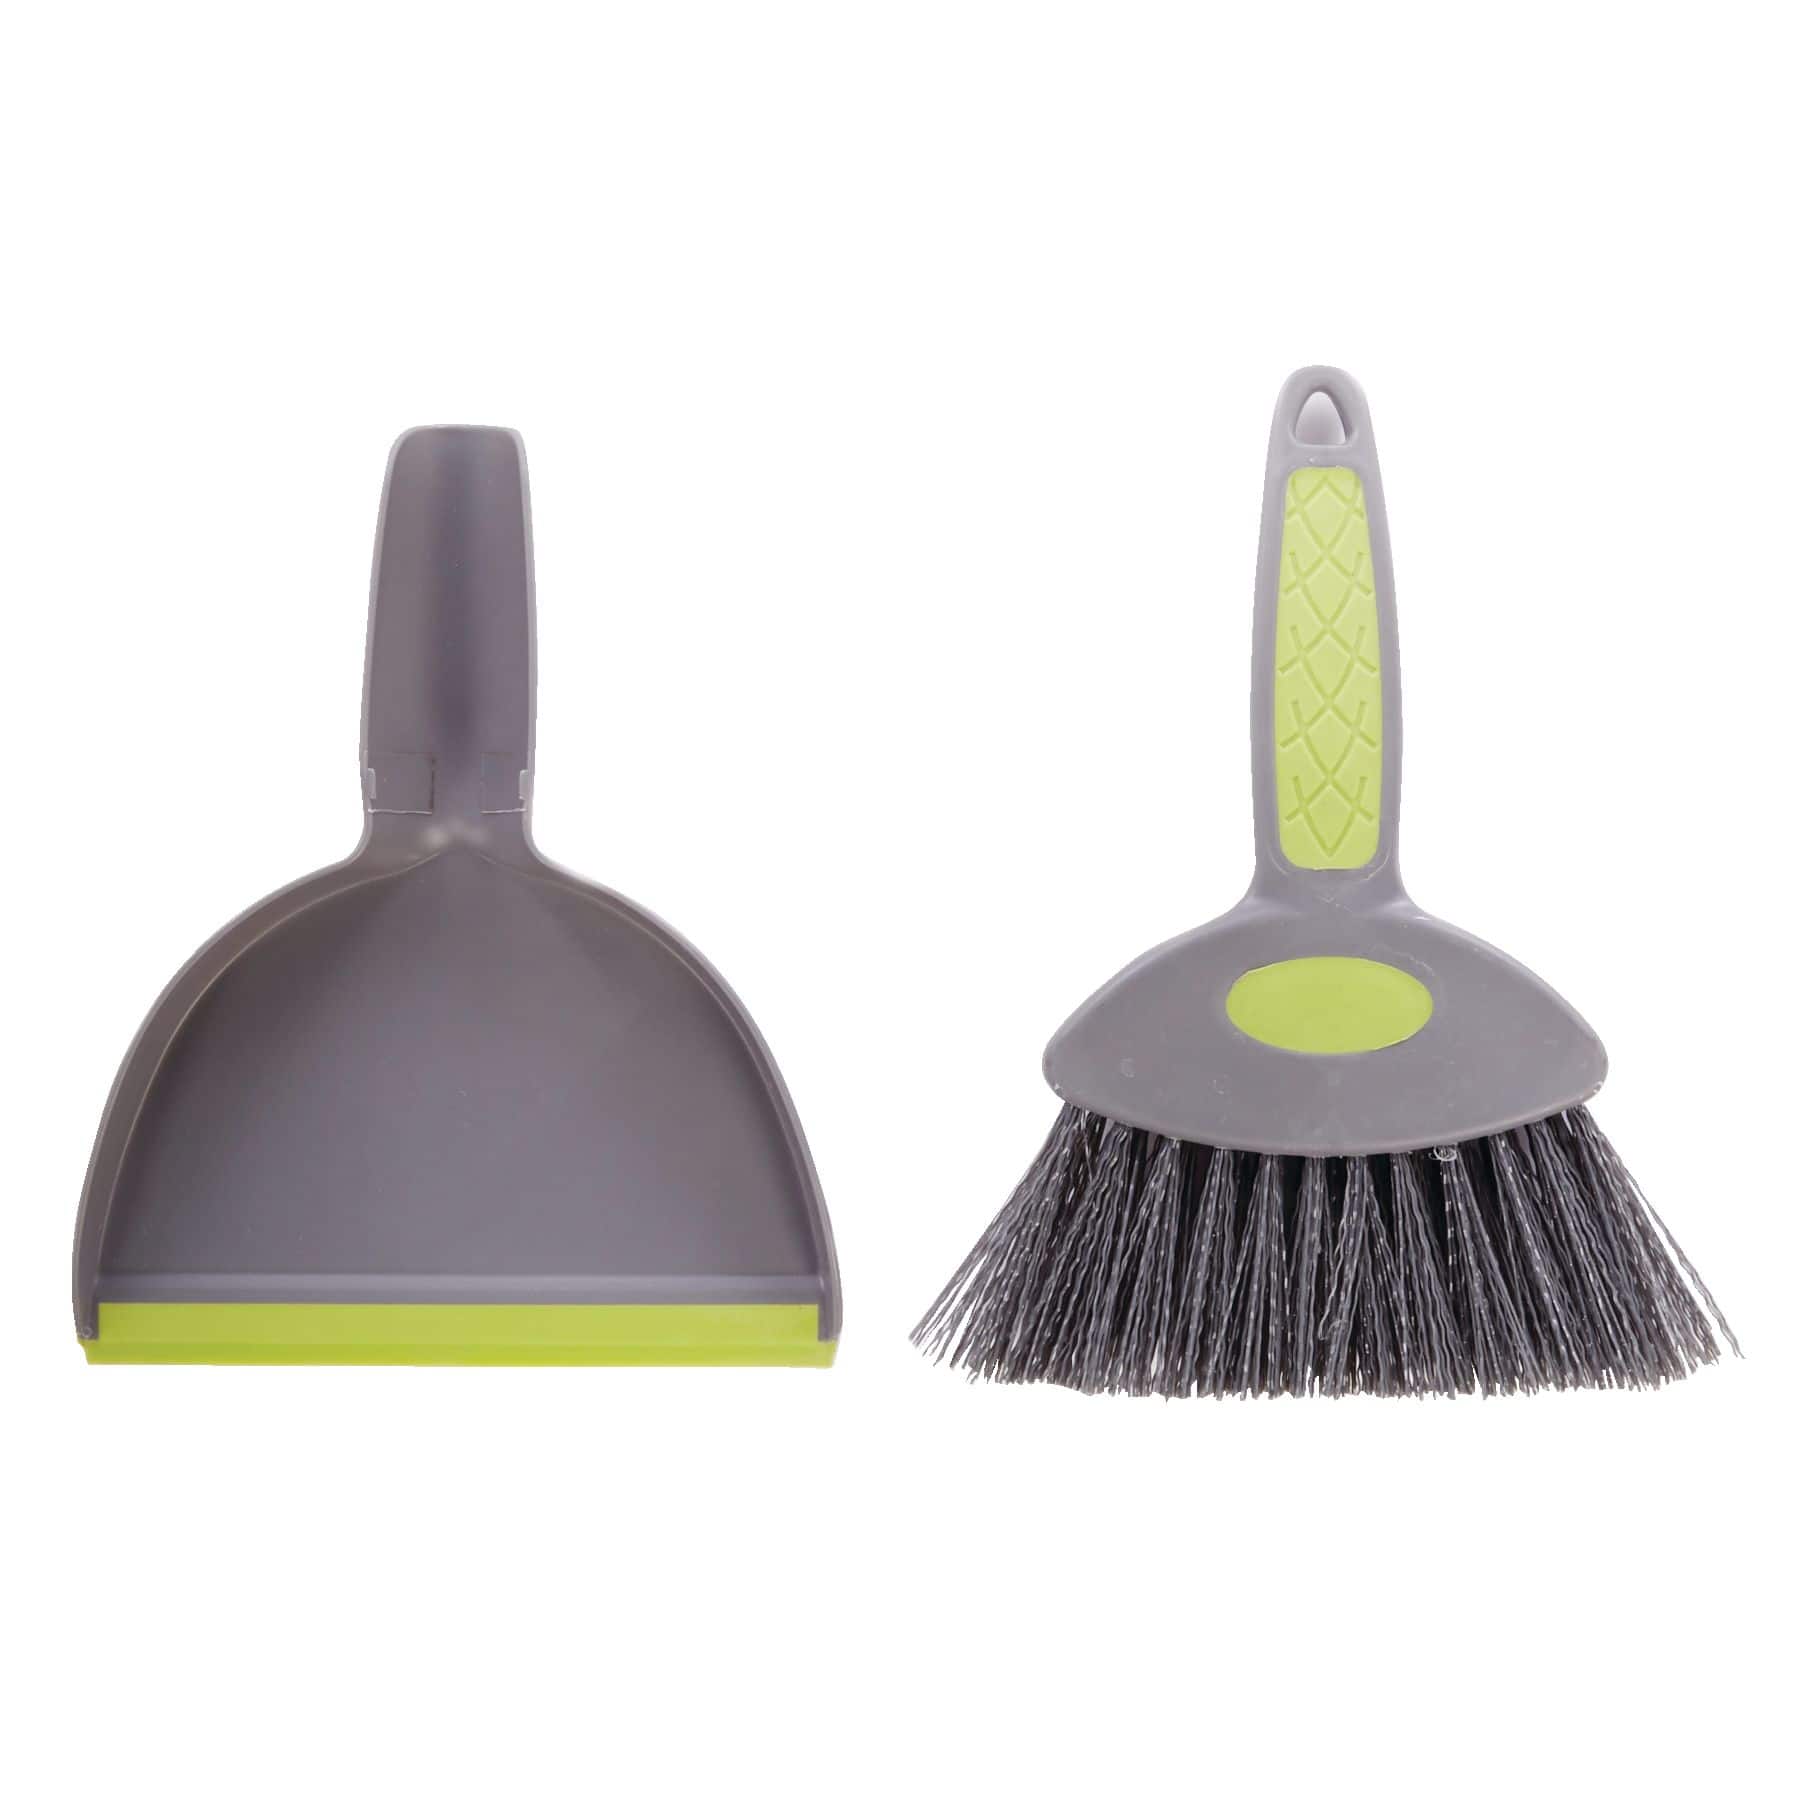 Buy Spectra Dual Compact Feeding Set with Cleaning Brush Online